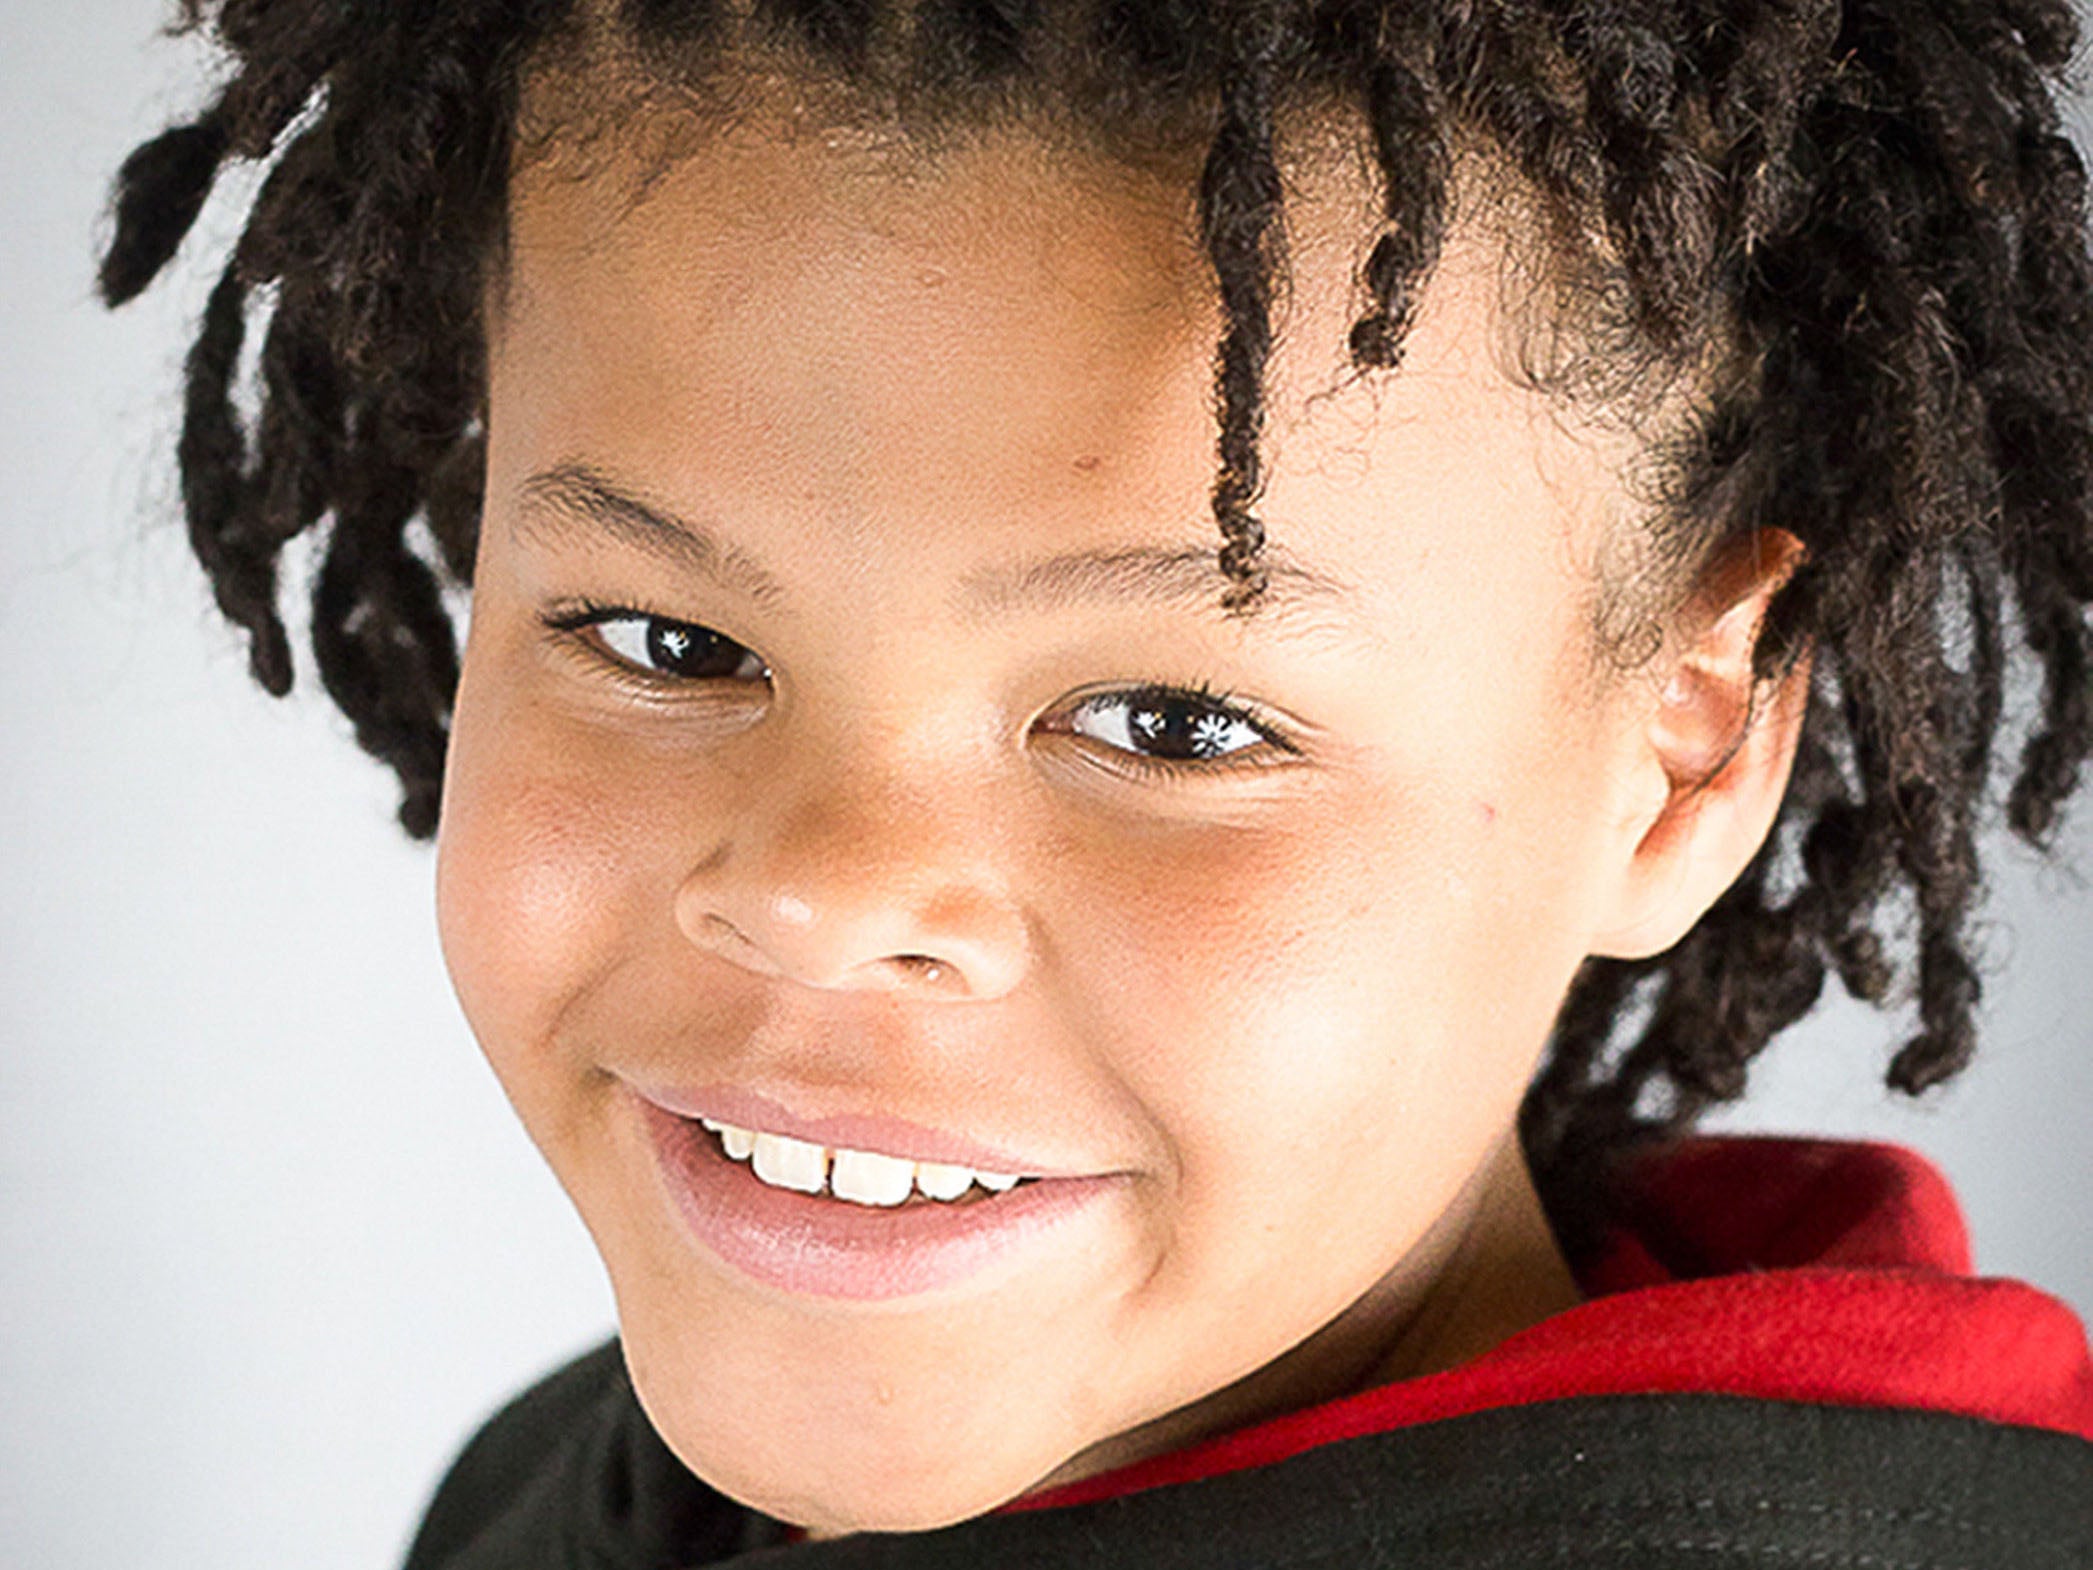 Makayah McDermott was walking with his siblings when he was hit by a stolen car